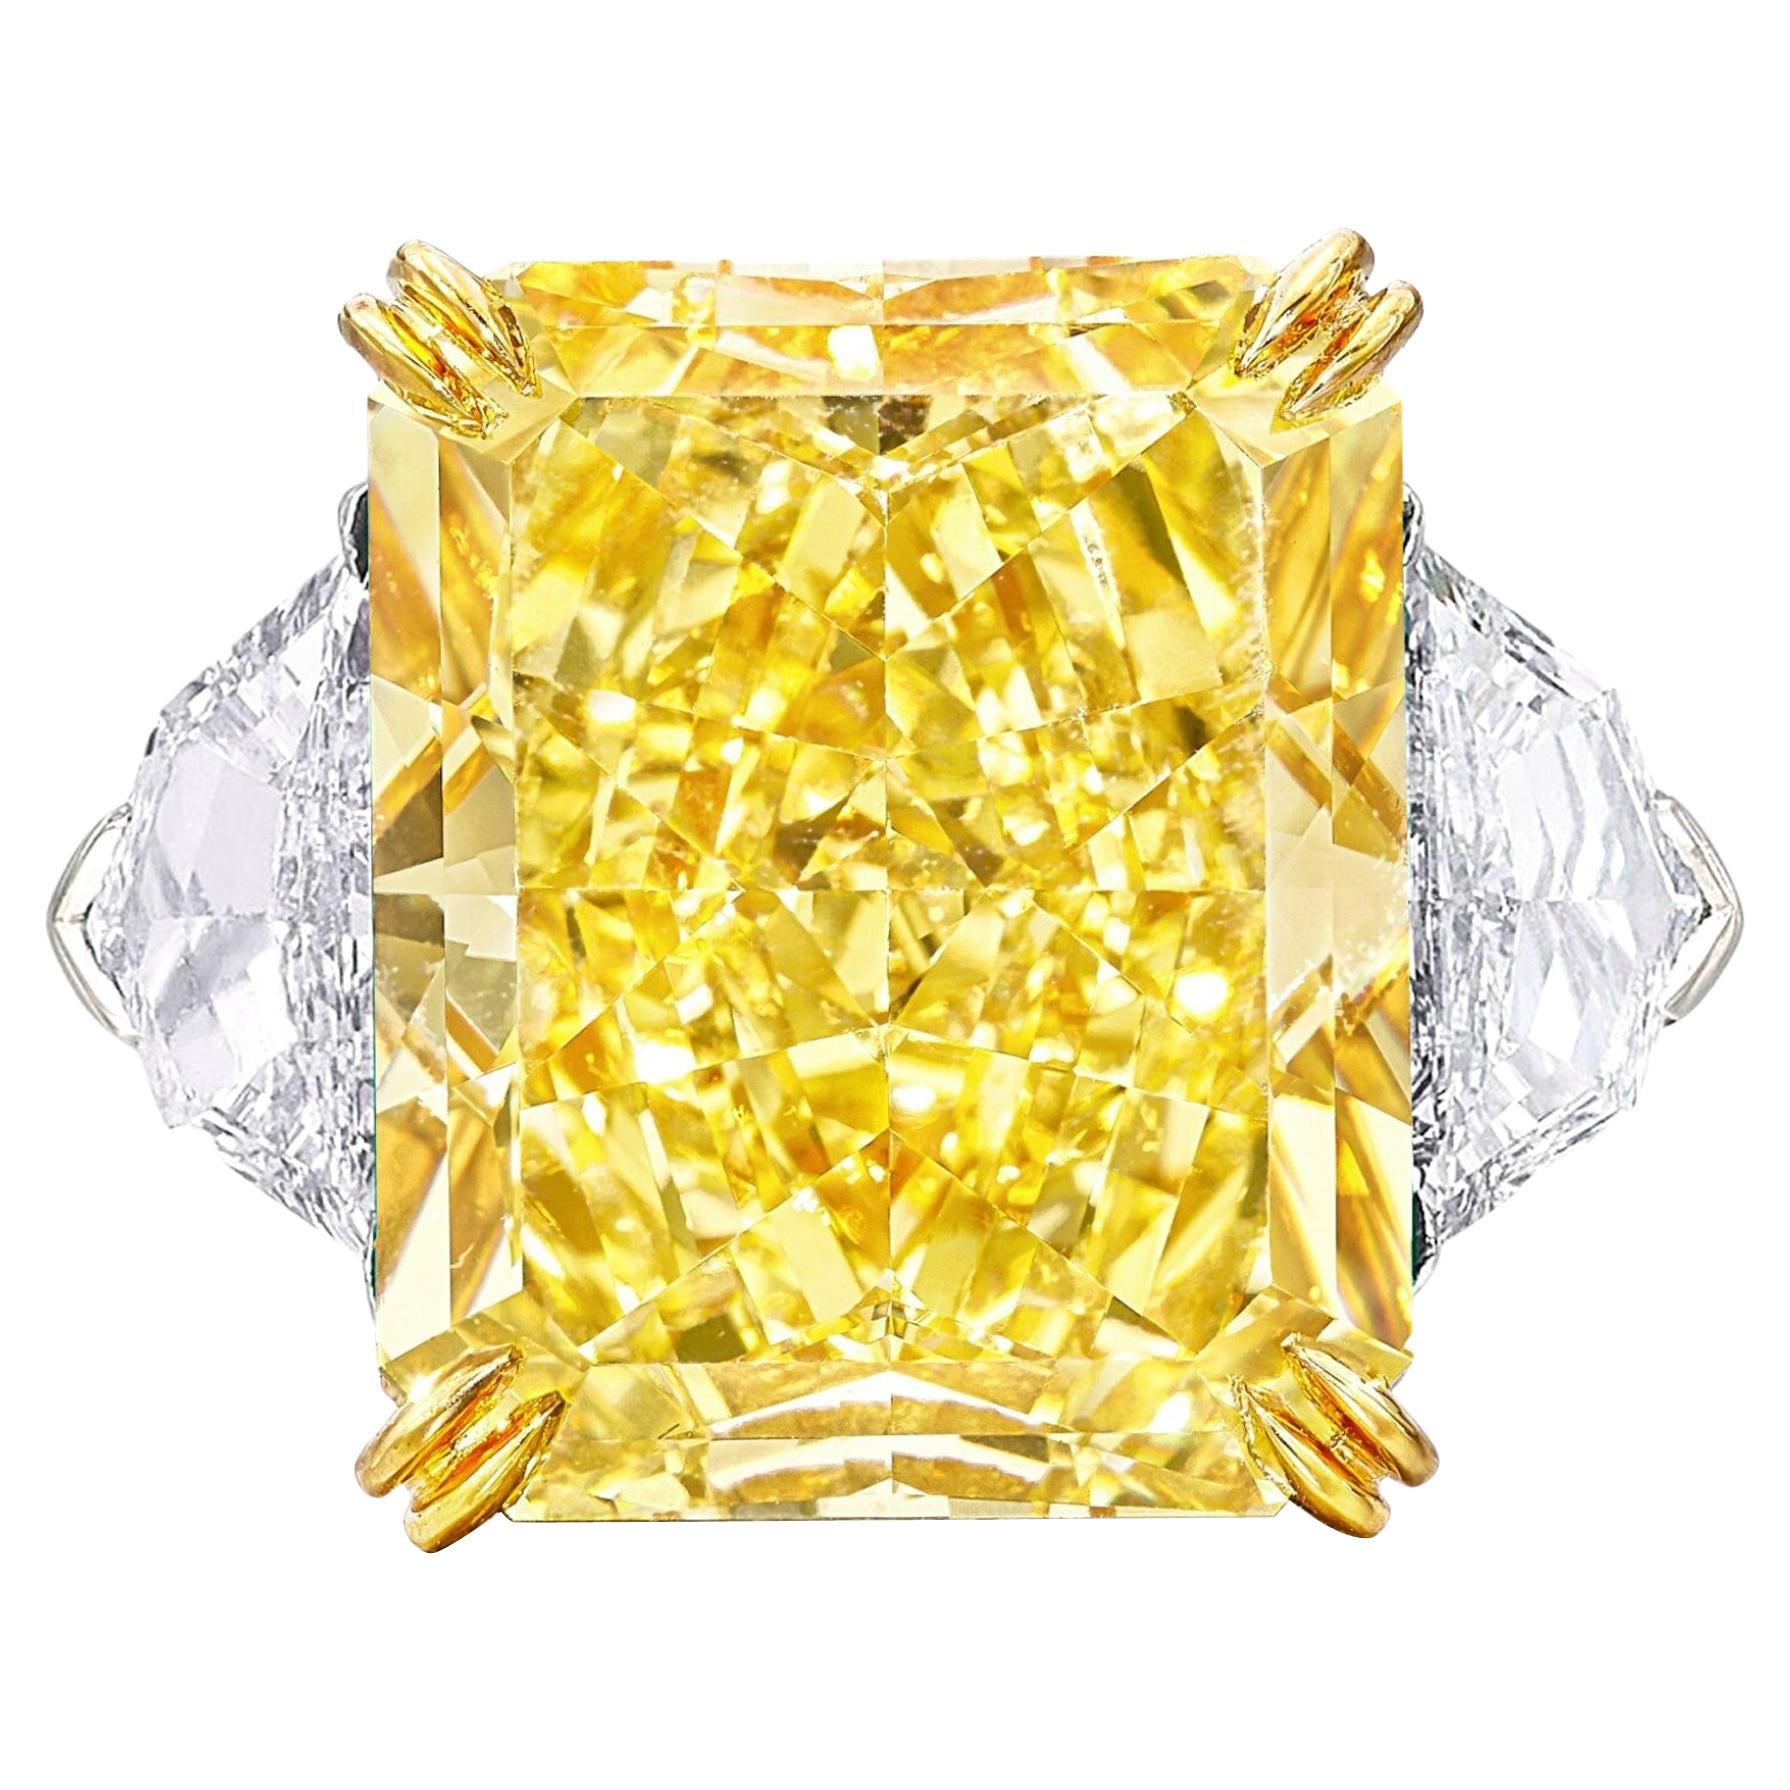 Exceptional GIA Certified 10.80 Carat Fancy Yellow Diamond Ring For Sale